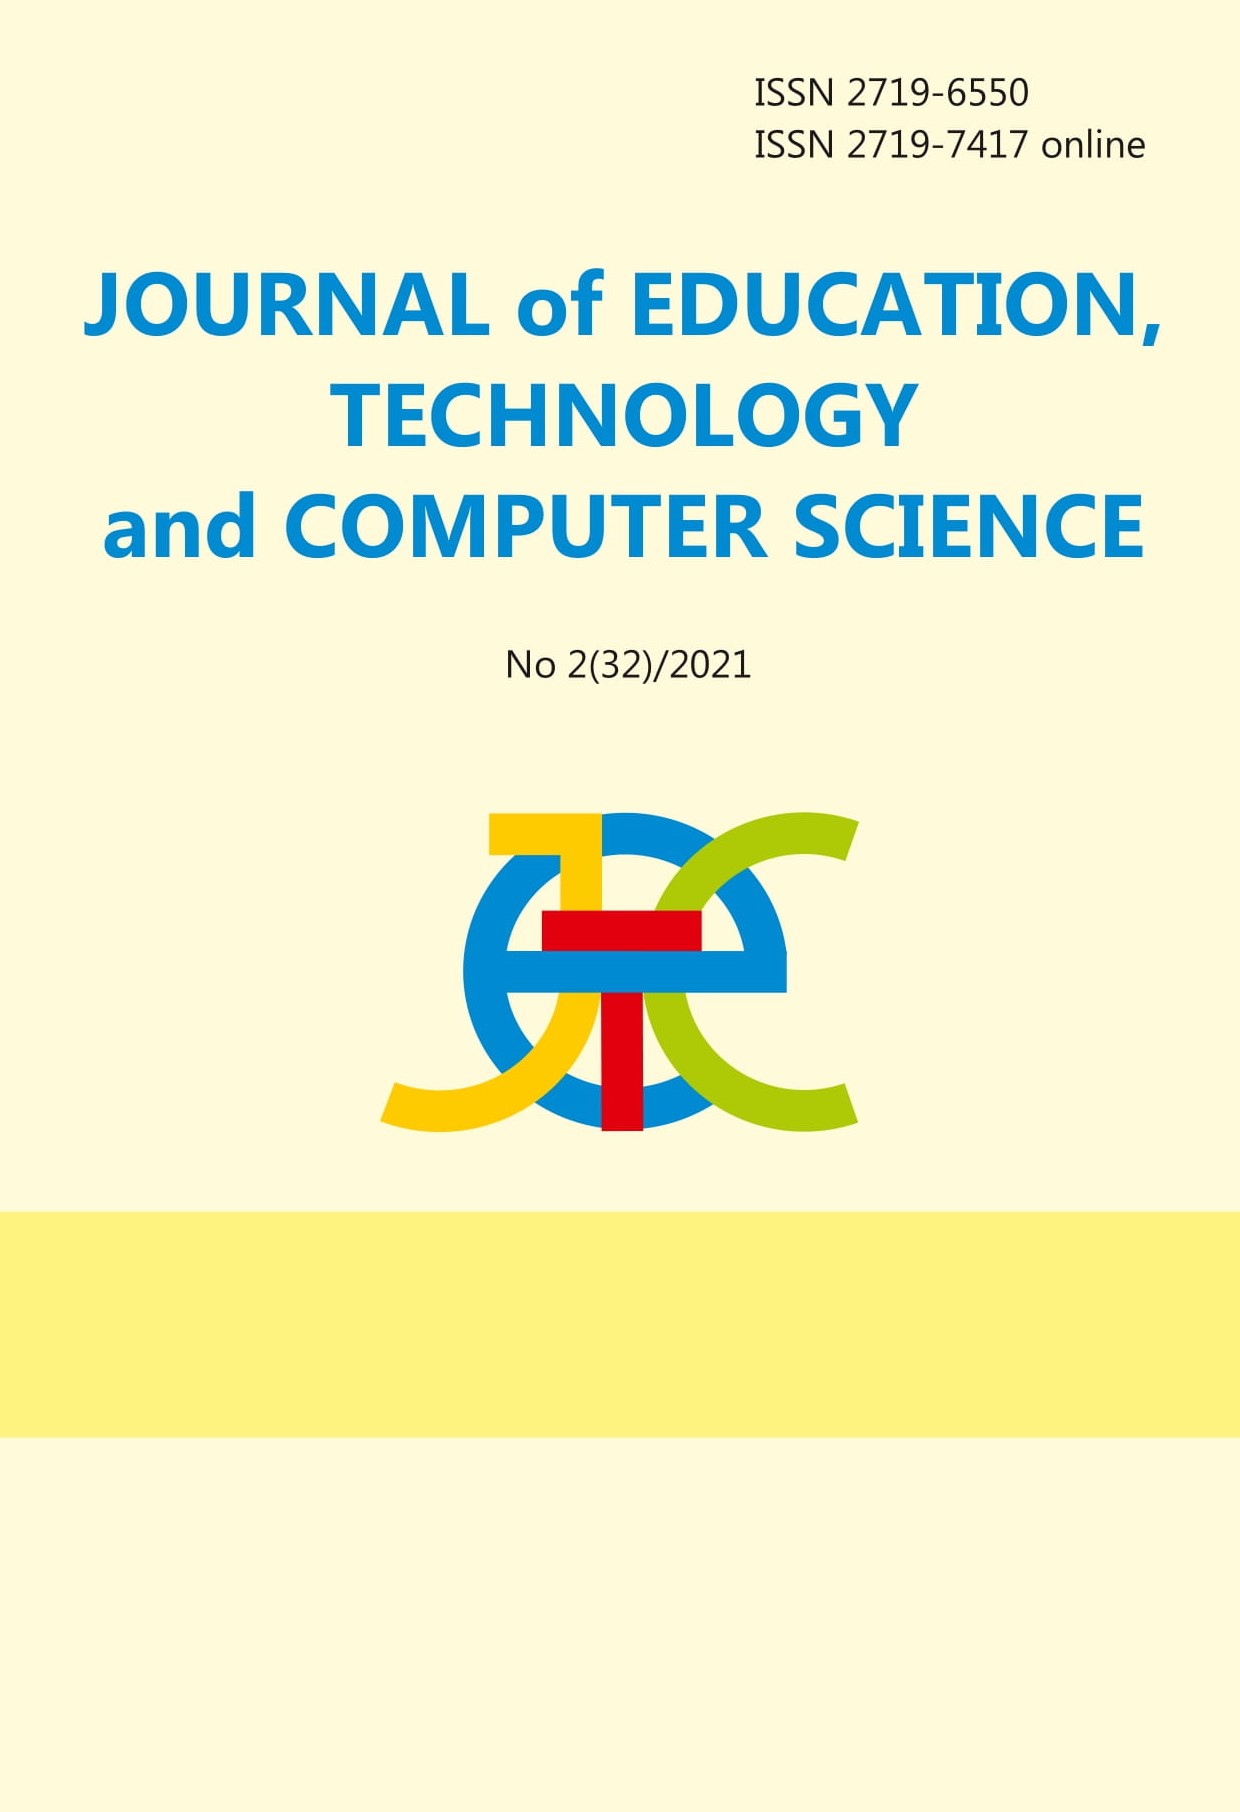 Journal of Education, Technology and Computer Science